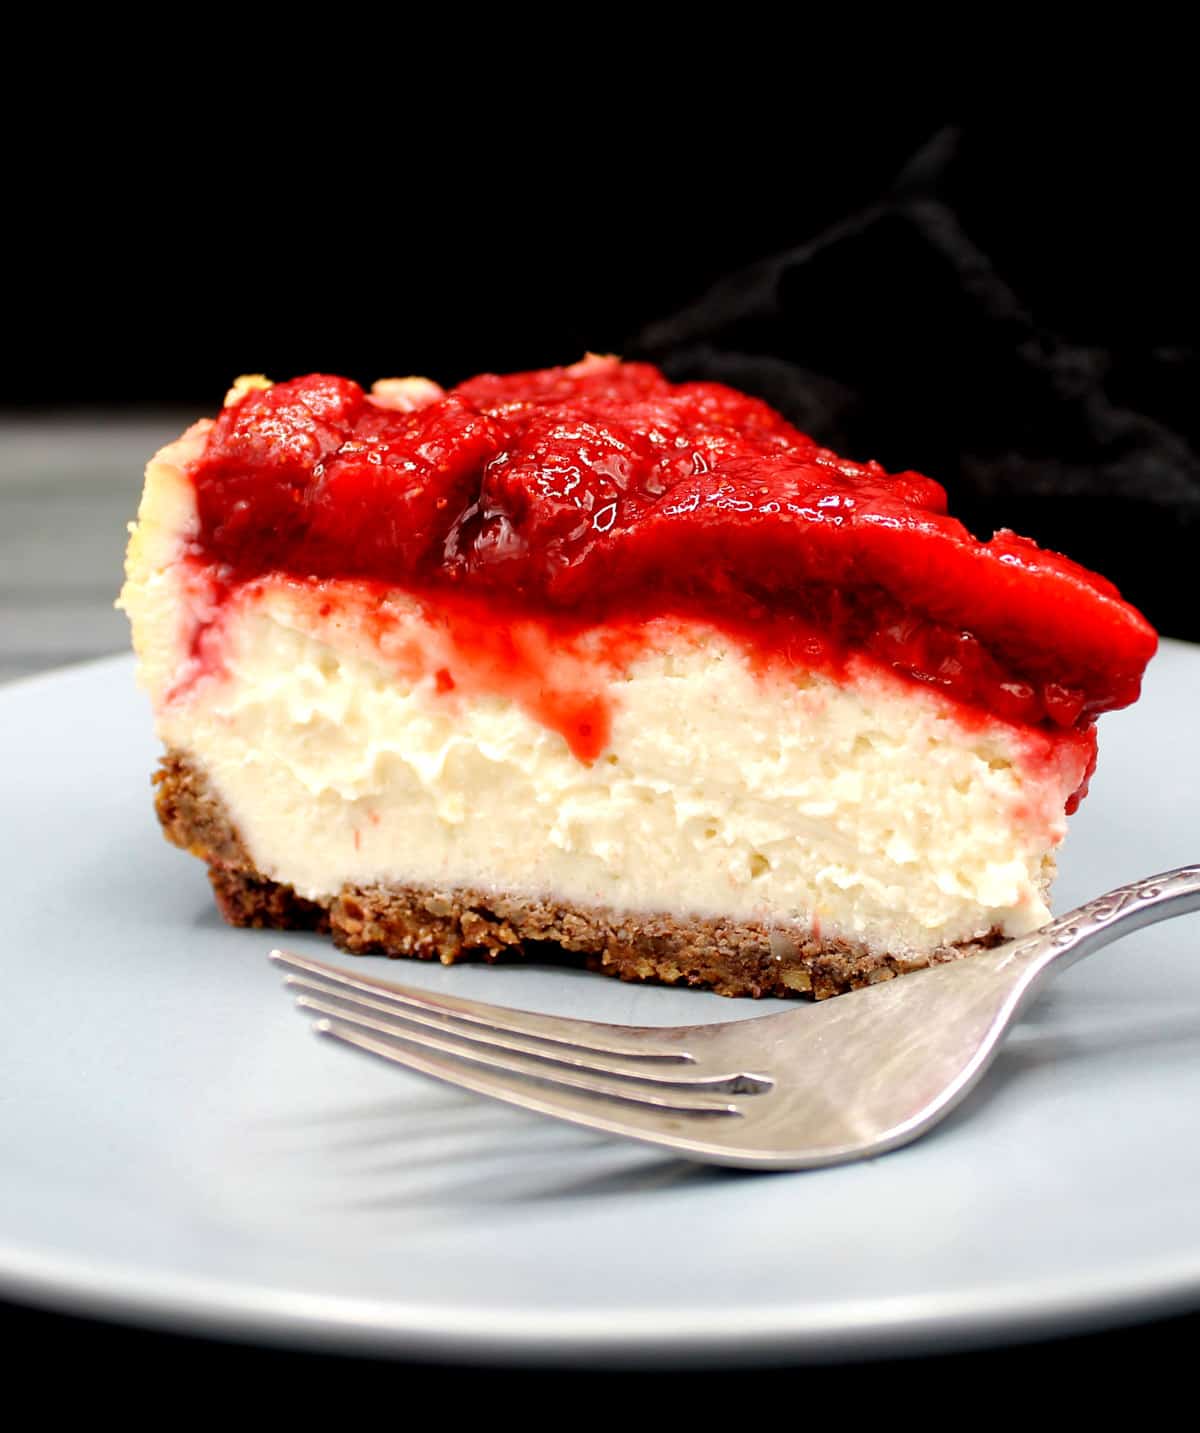 Side view of a creamy slice of vegan low carb cheesecake with strawberry topping.